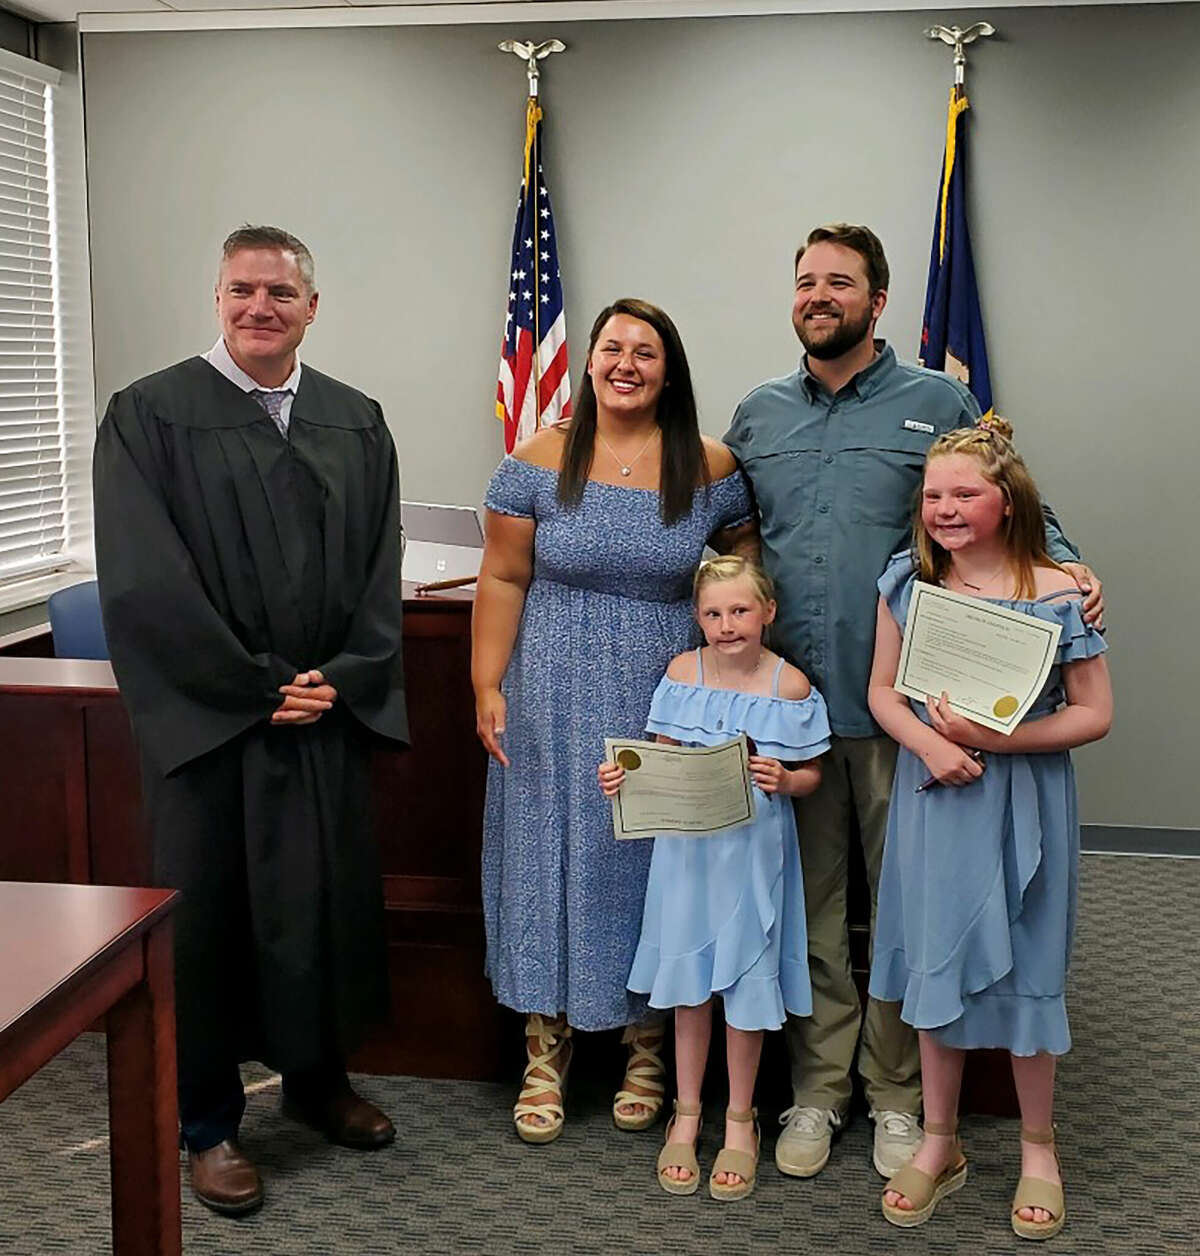 Zach and Haley Francis live in Lake Ann with their two daughters, Liv and Audie. The couple adopted the sisters on July 15 with assistance from Child & Family Services.